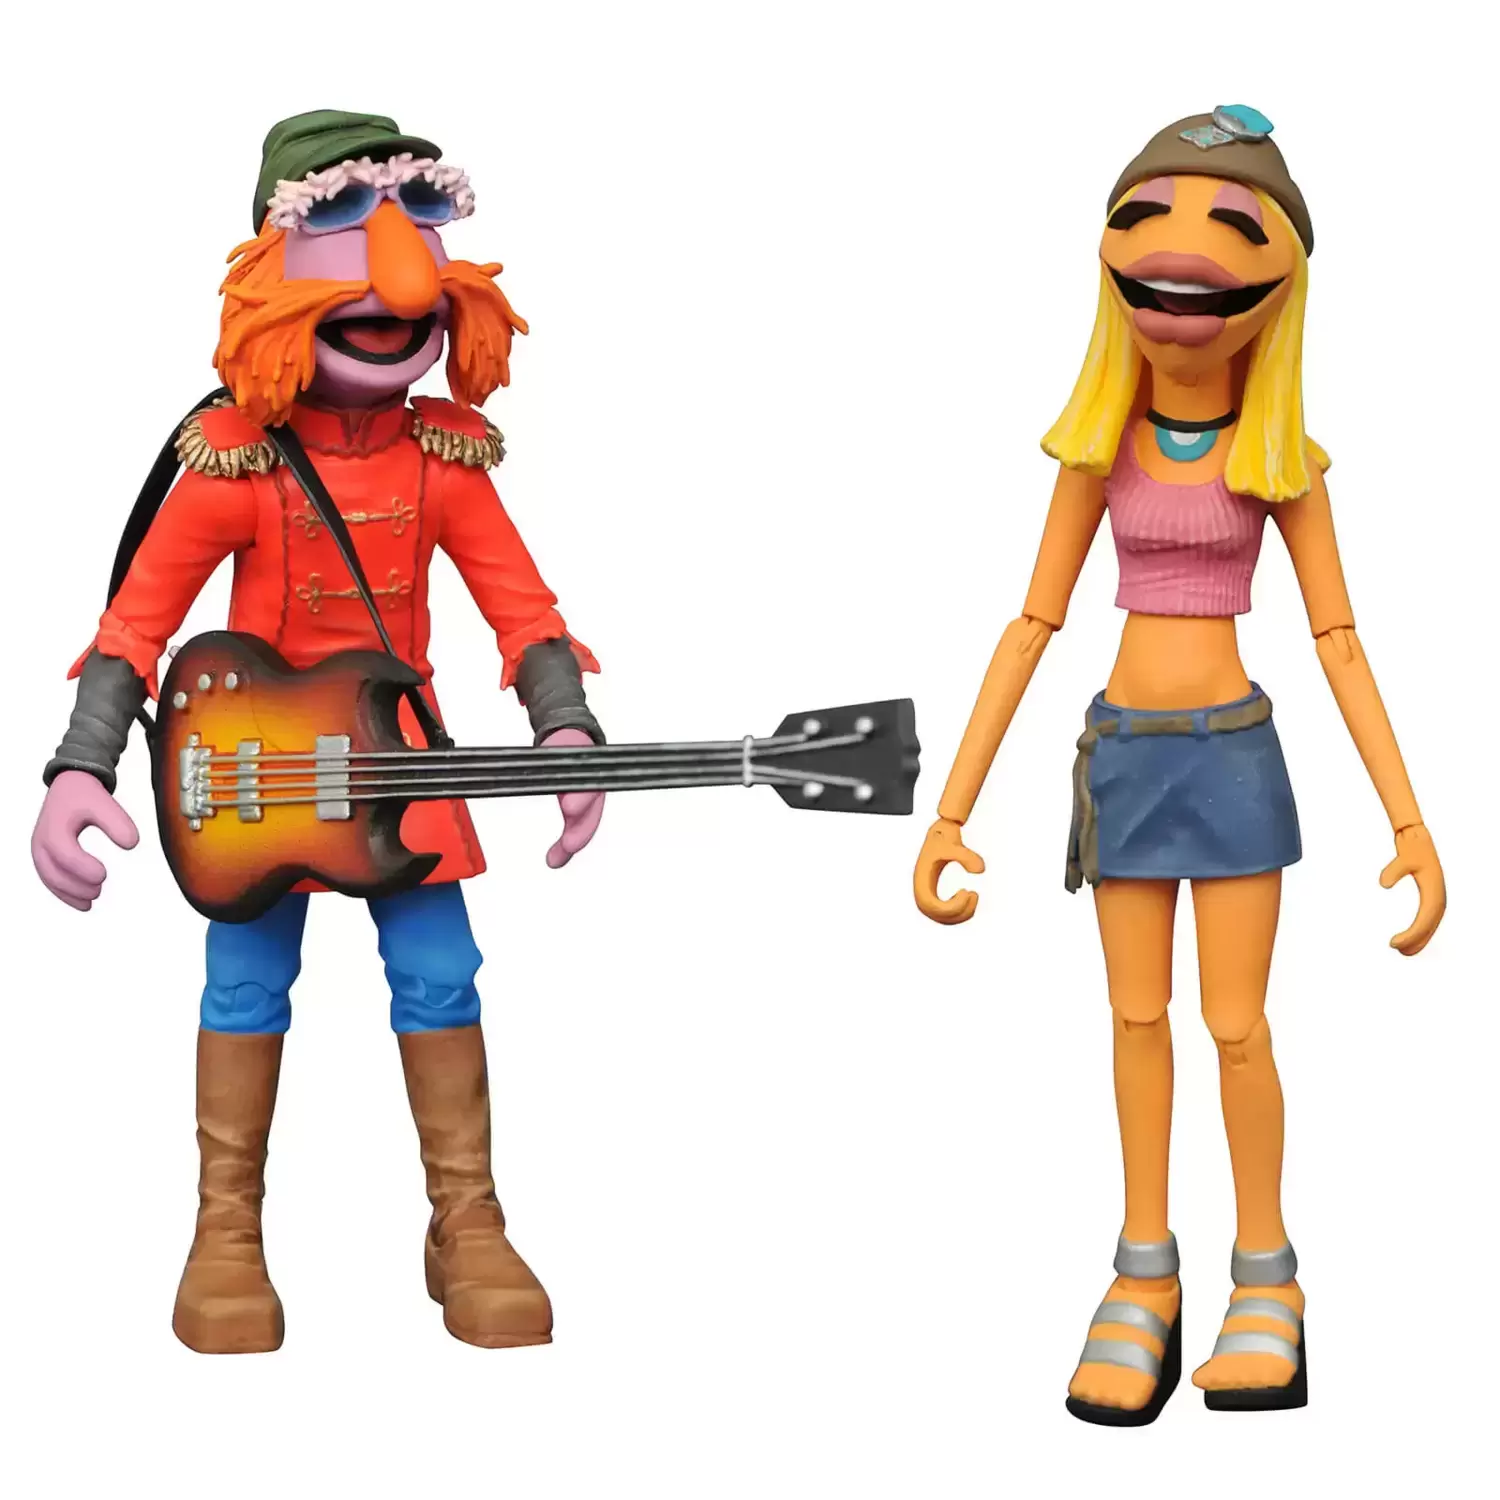 Ther Muppet Show - Diamond Select - Floyd & Janice